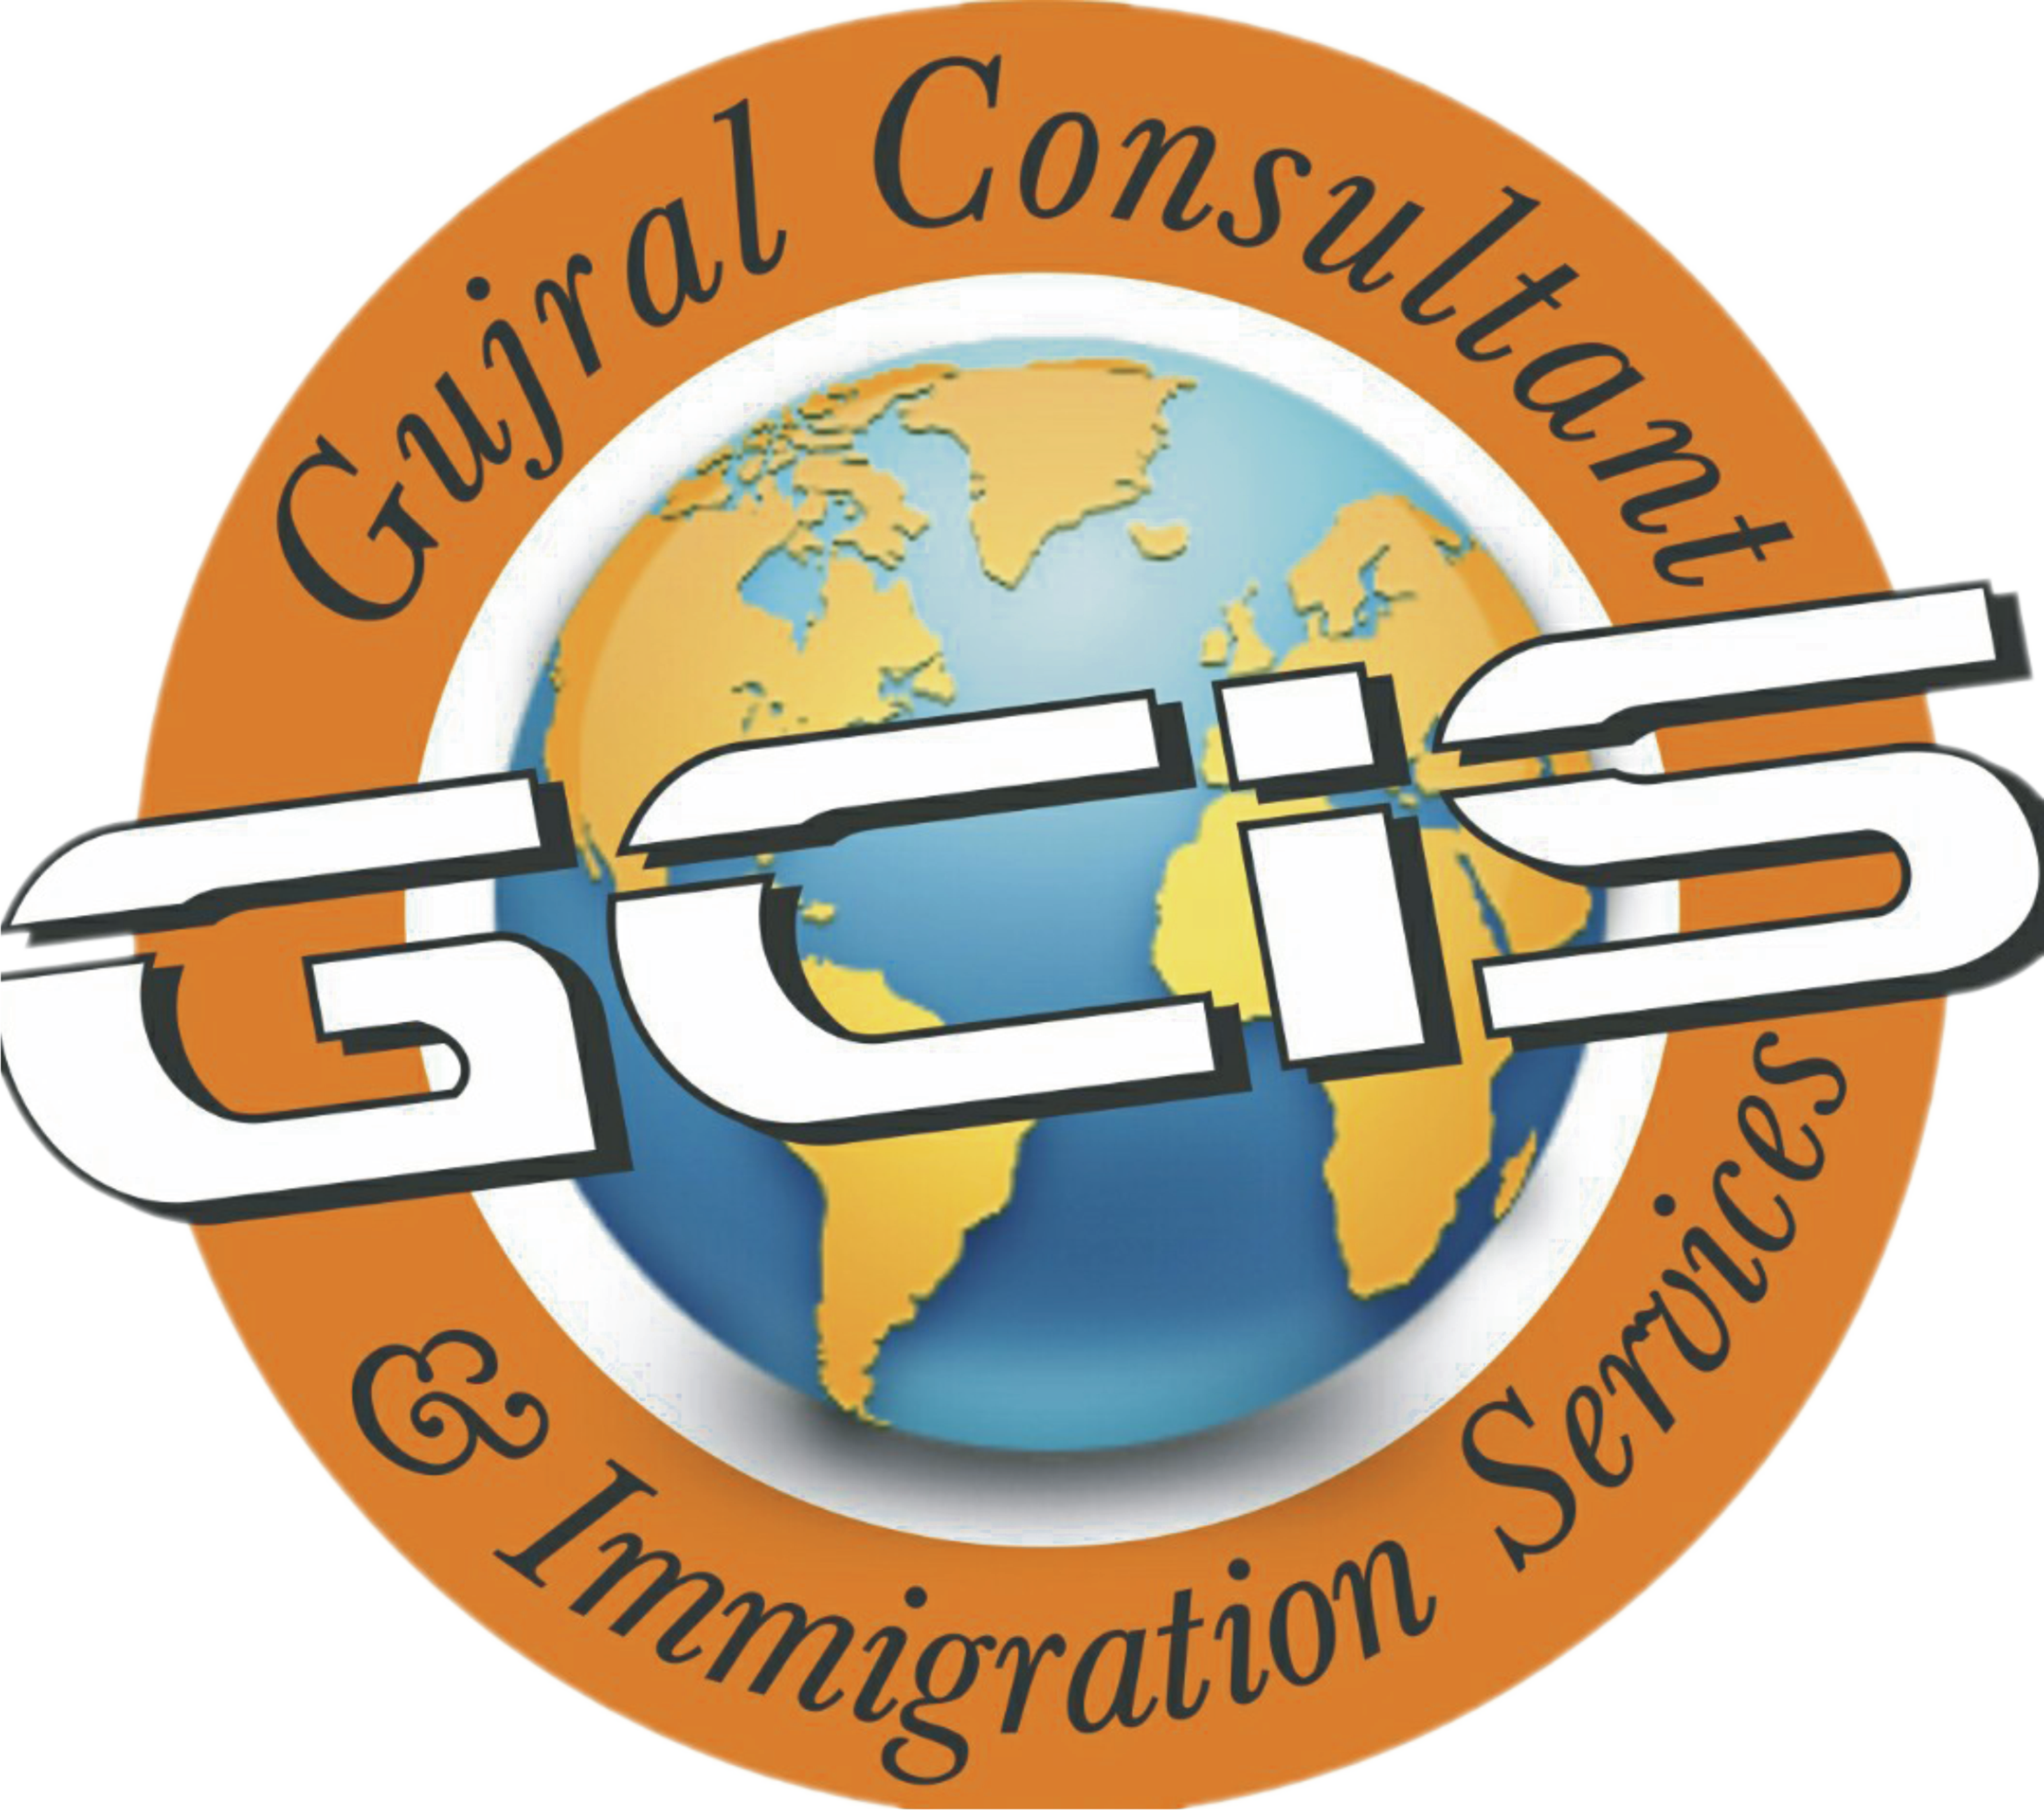 Gujral Consultant & Immigration Services|Legal Services|Professional Services